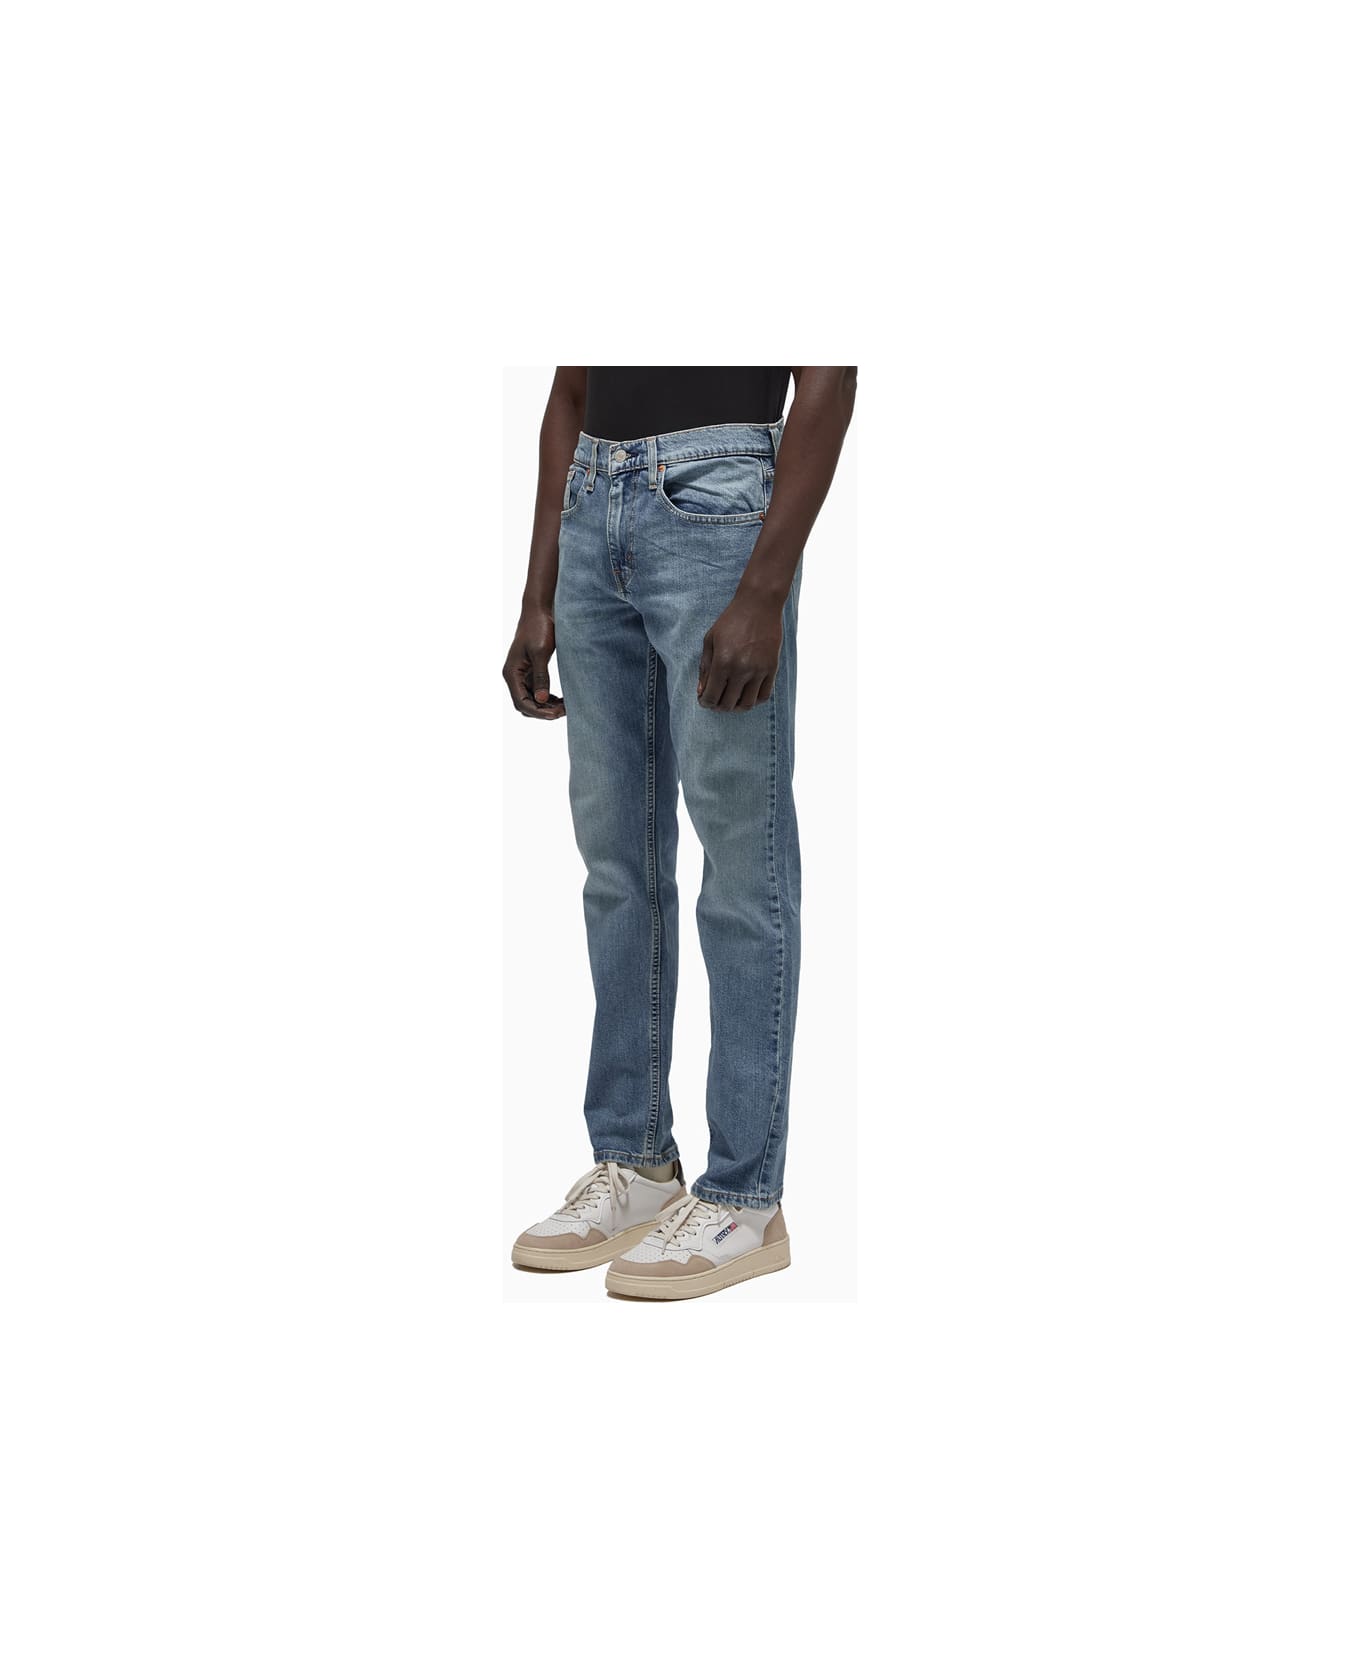 Levi's Levis 502 Into The Thick Of It Adv Jeans - Blue